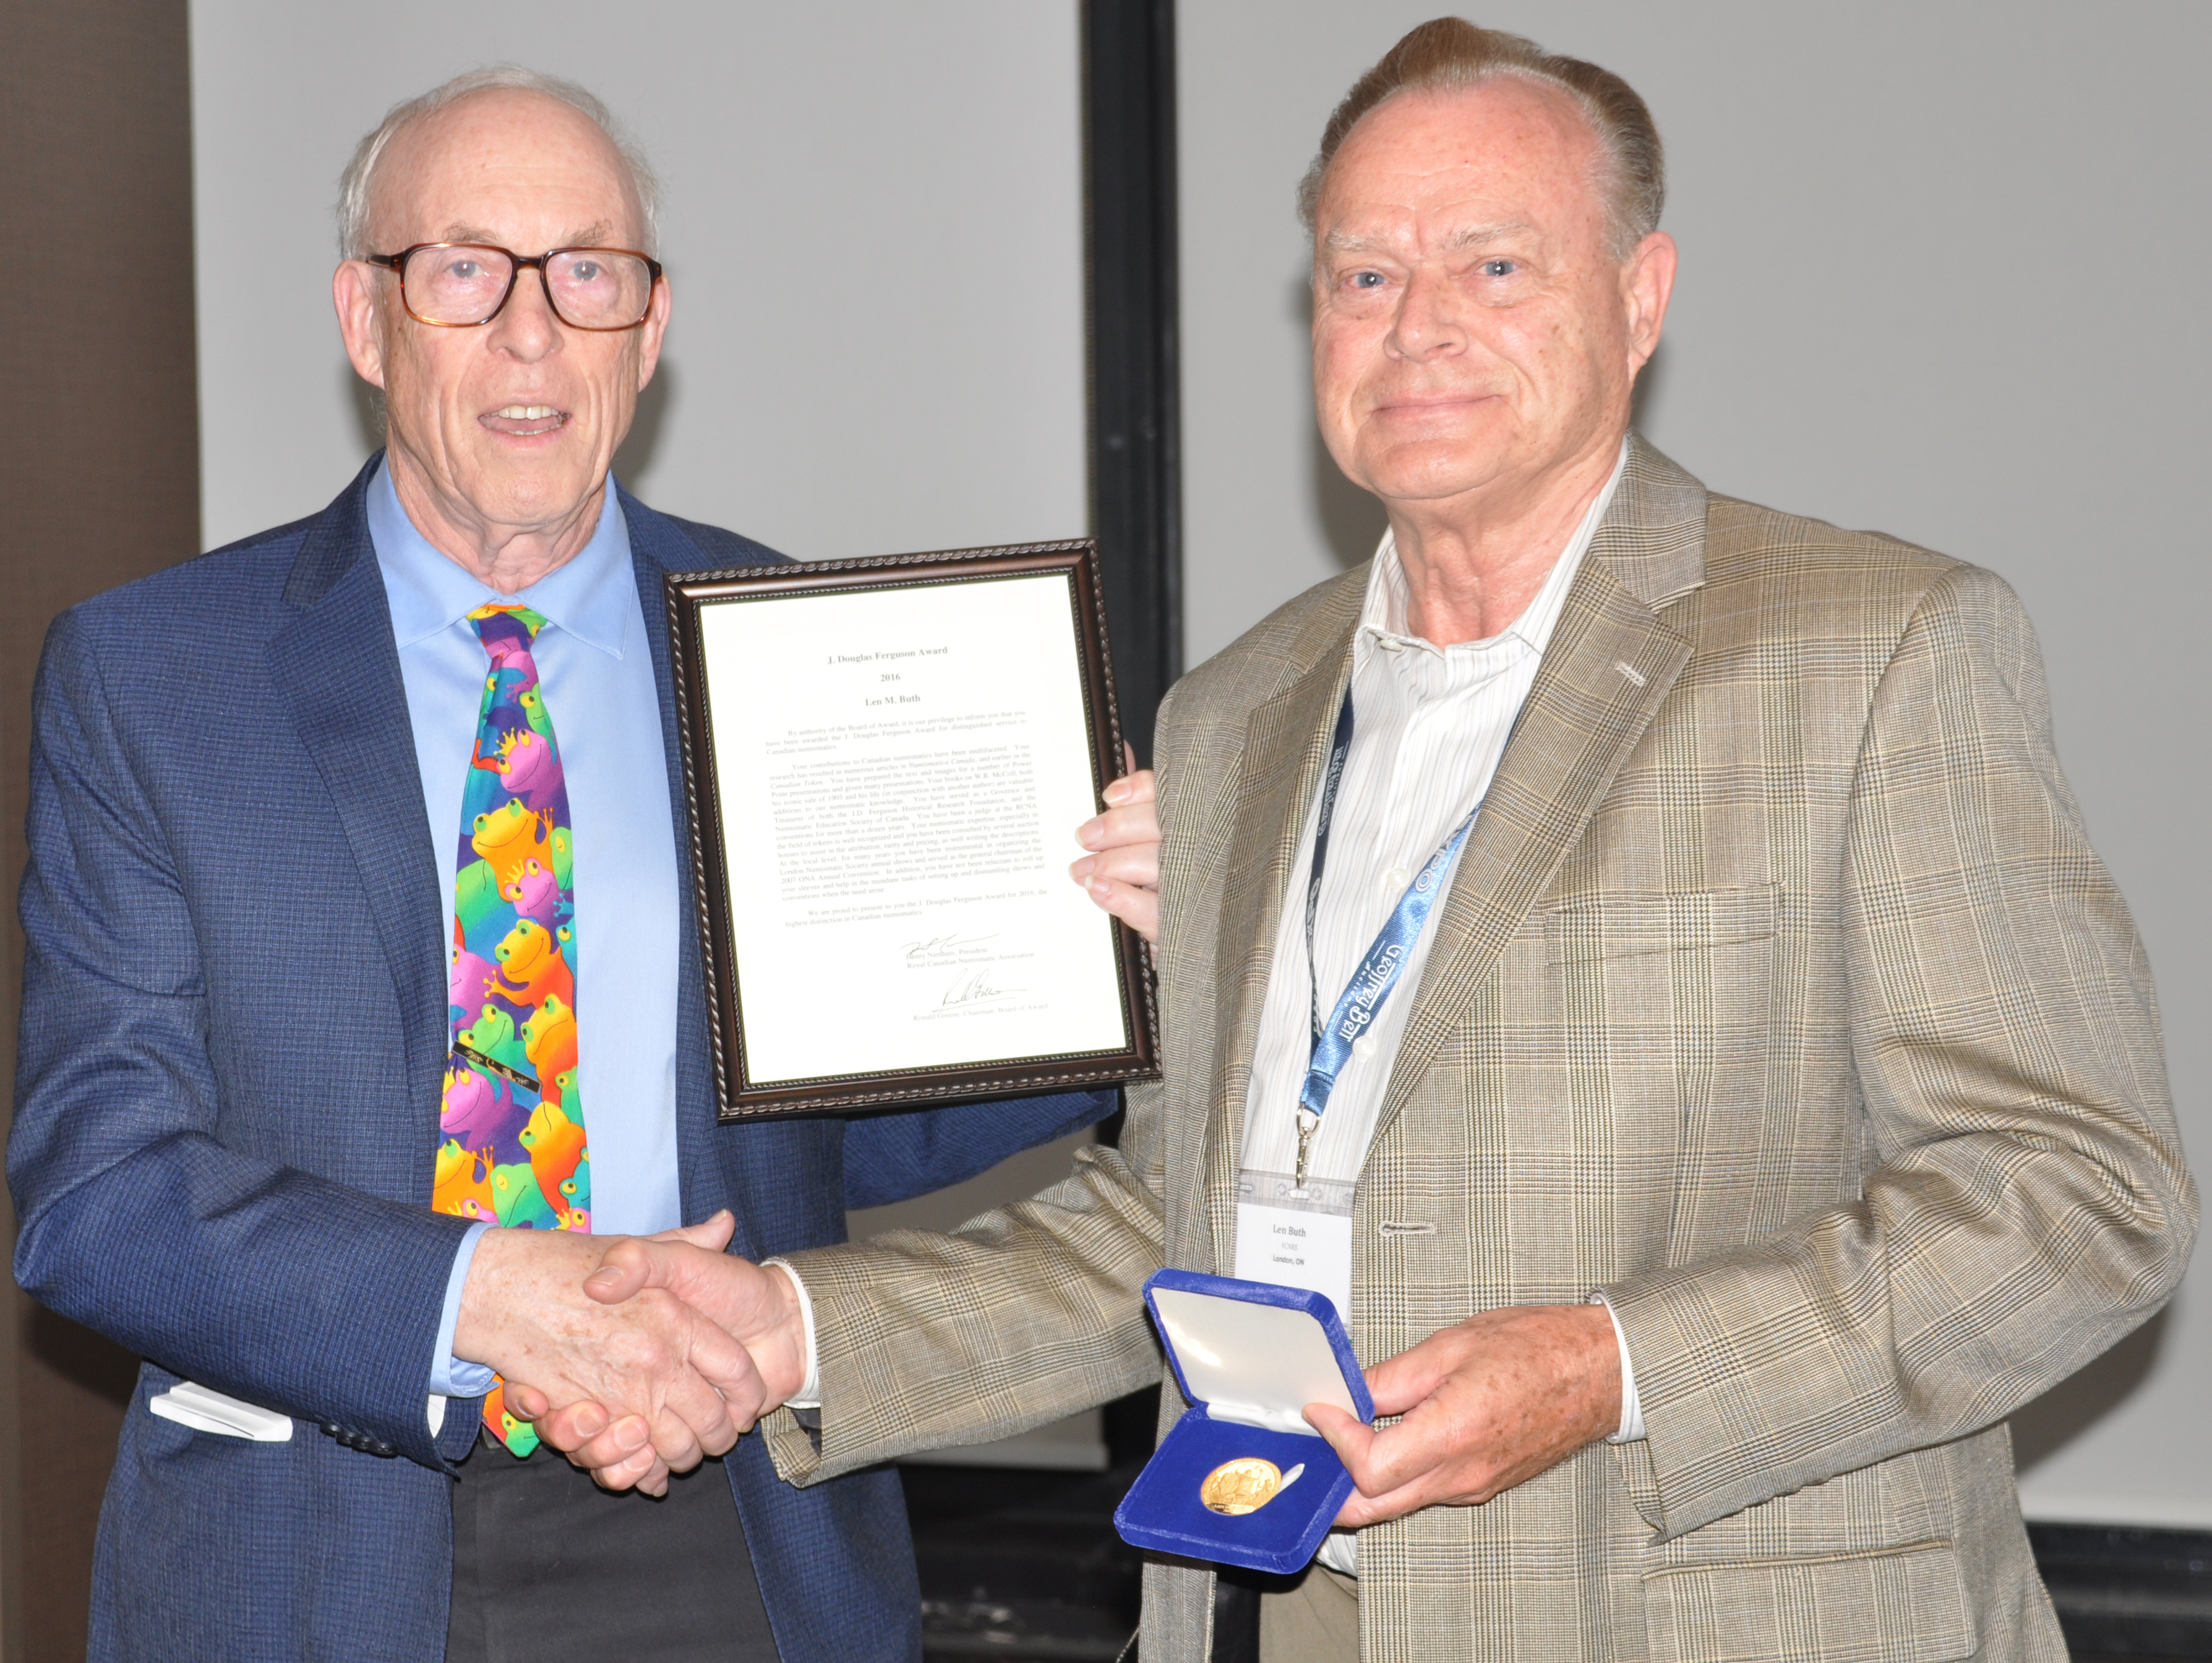 <p><strong>Len Buth</strong> (right) receiving the J. Douglas Ferguson Award from <strong>Ron Greene</strong> (left).</p>
<p><small>Jeff Fournier photo</small></p>